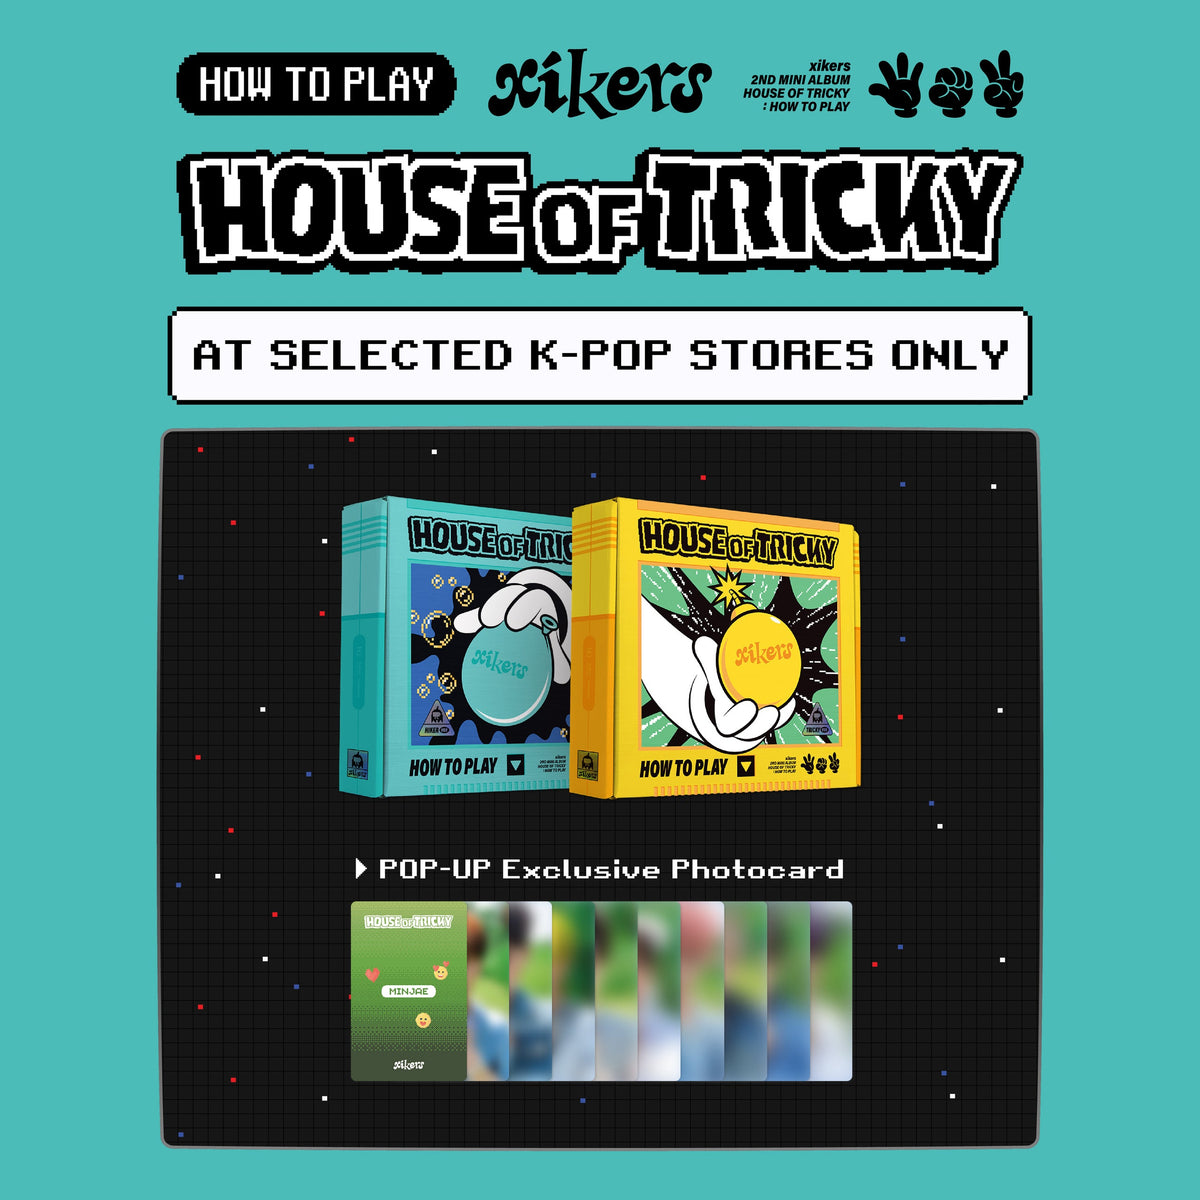 xikers HOUSE OF TRICKY HOW TO PLAY 2nd Mini Album - US POP-UP Exclusive image